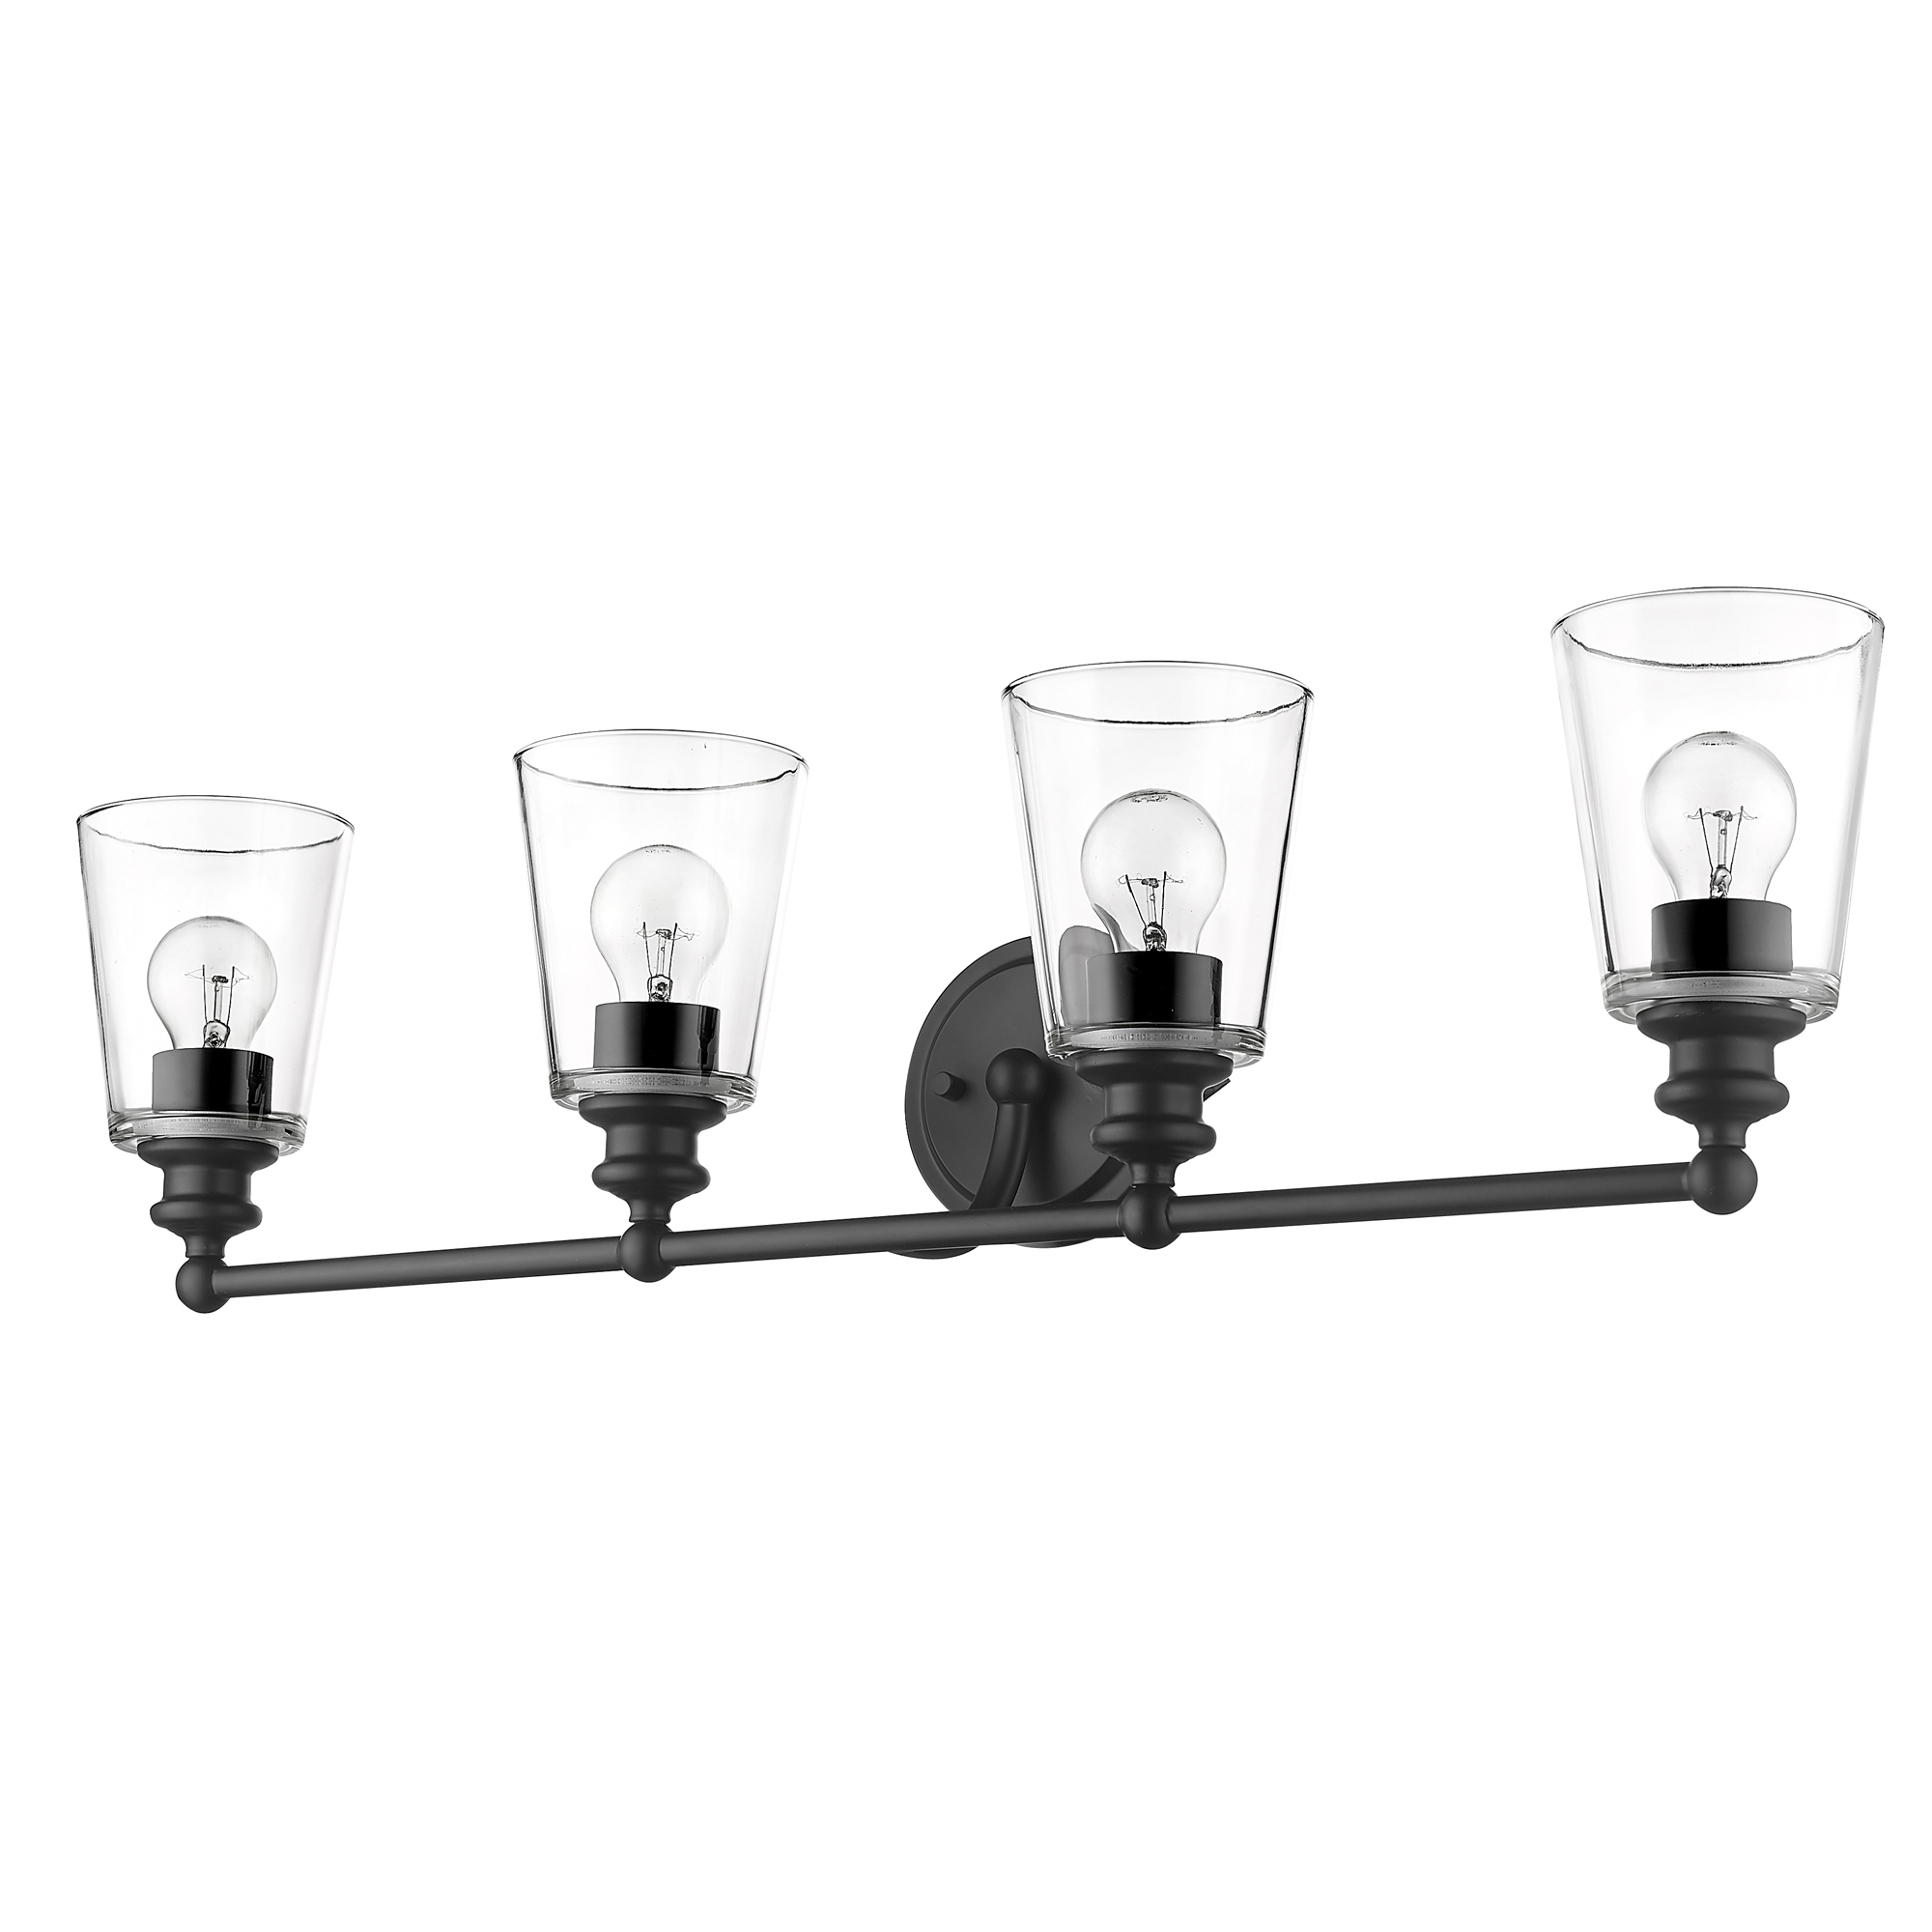 Acclaim Lighting-IN41403BK-Ceil 4-Light Vanity - 15.75 Inches Wide by 8.25 Inches High   Matte Black Finish